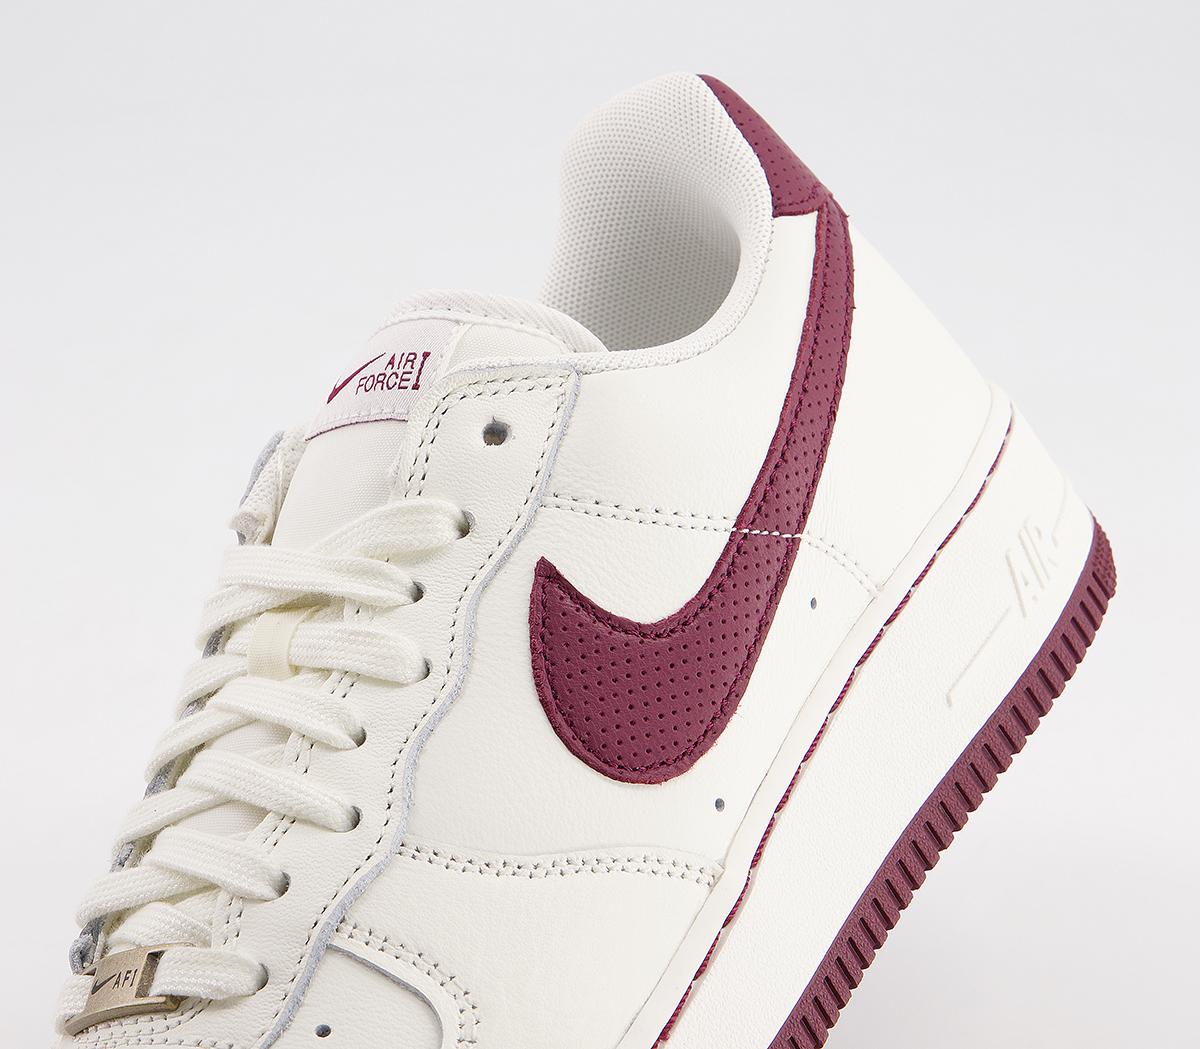 Nike Air Force 1 07 Trainers Craft Sail Dark Beetroot - His trainers